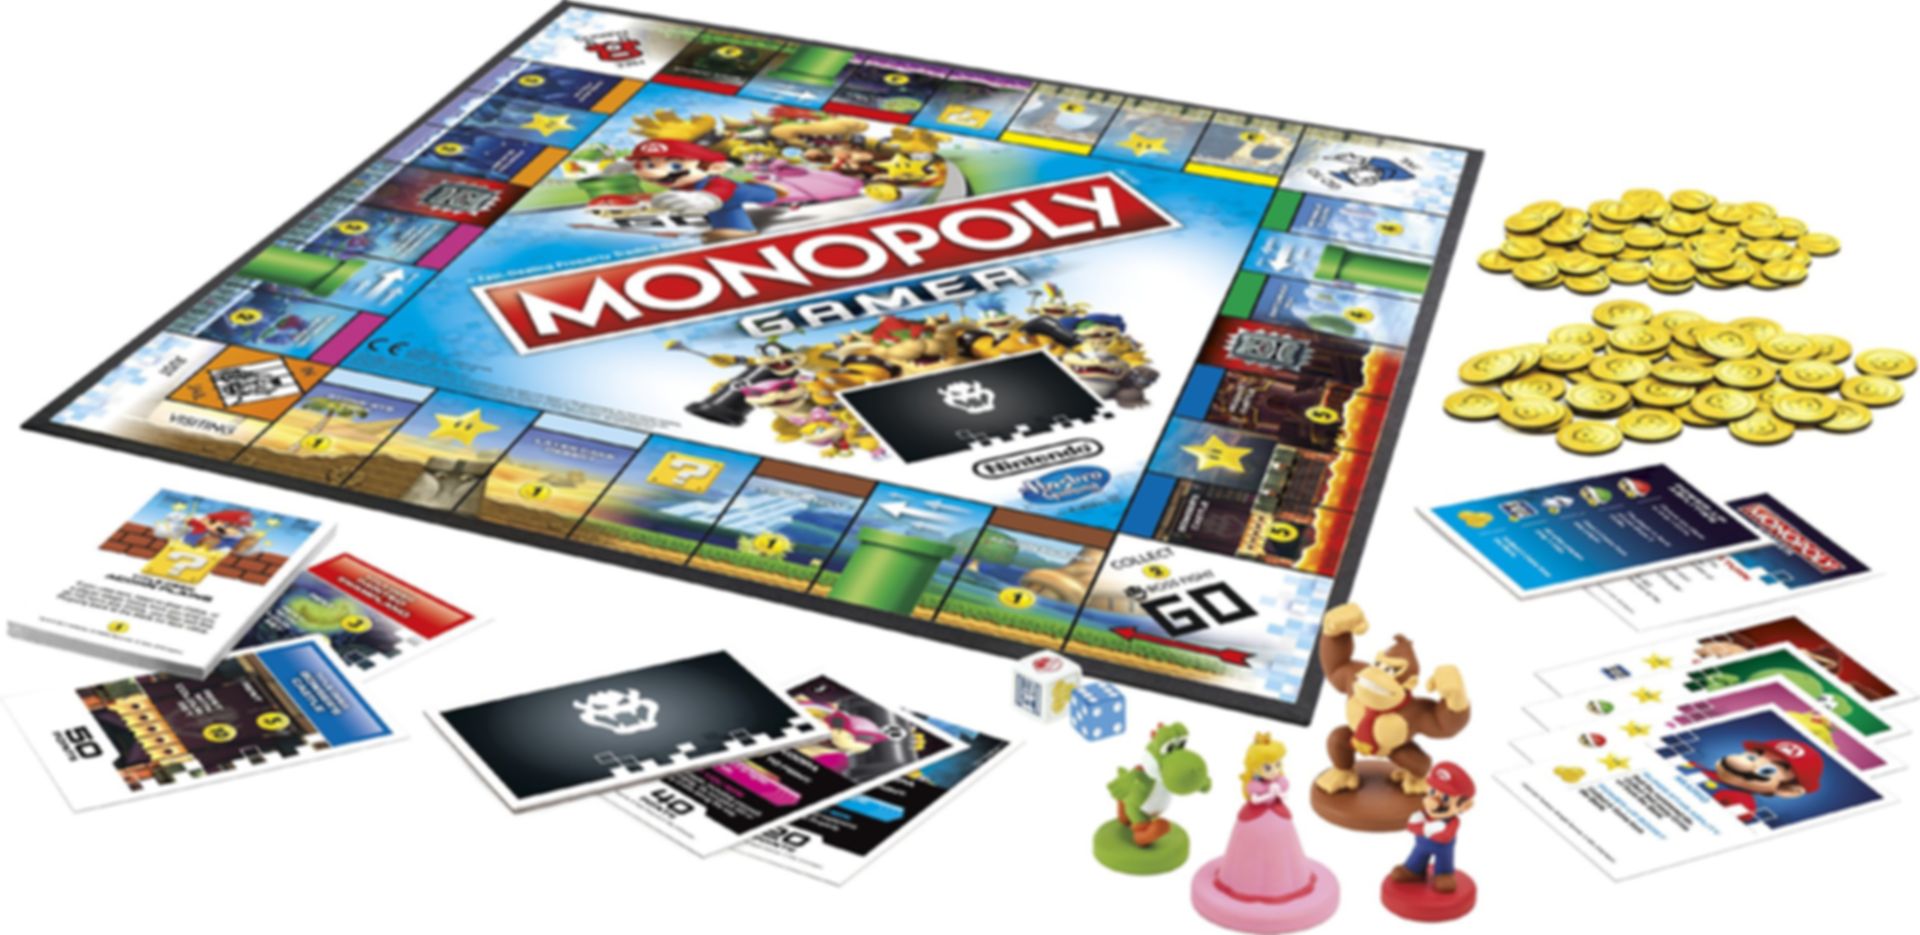 Monopoly Gamer components